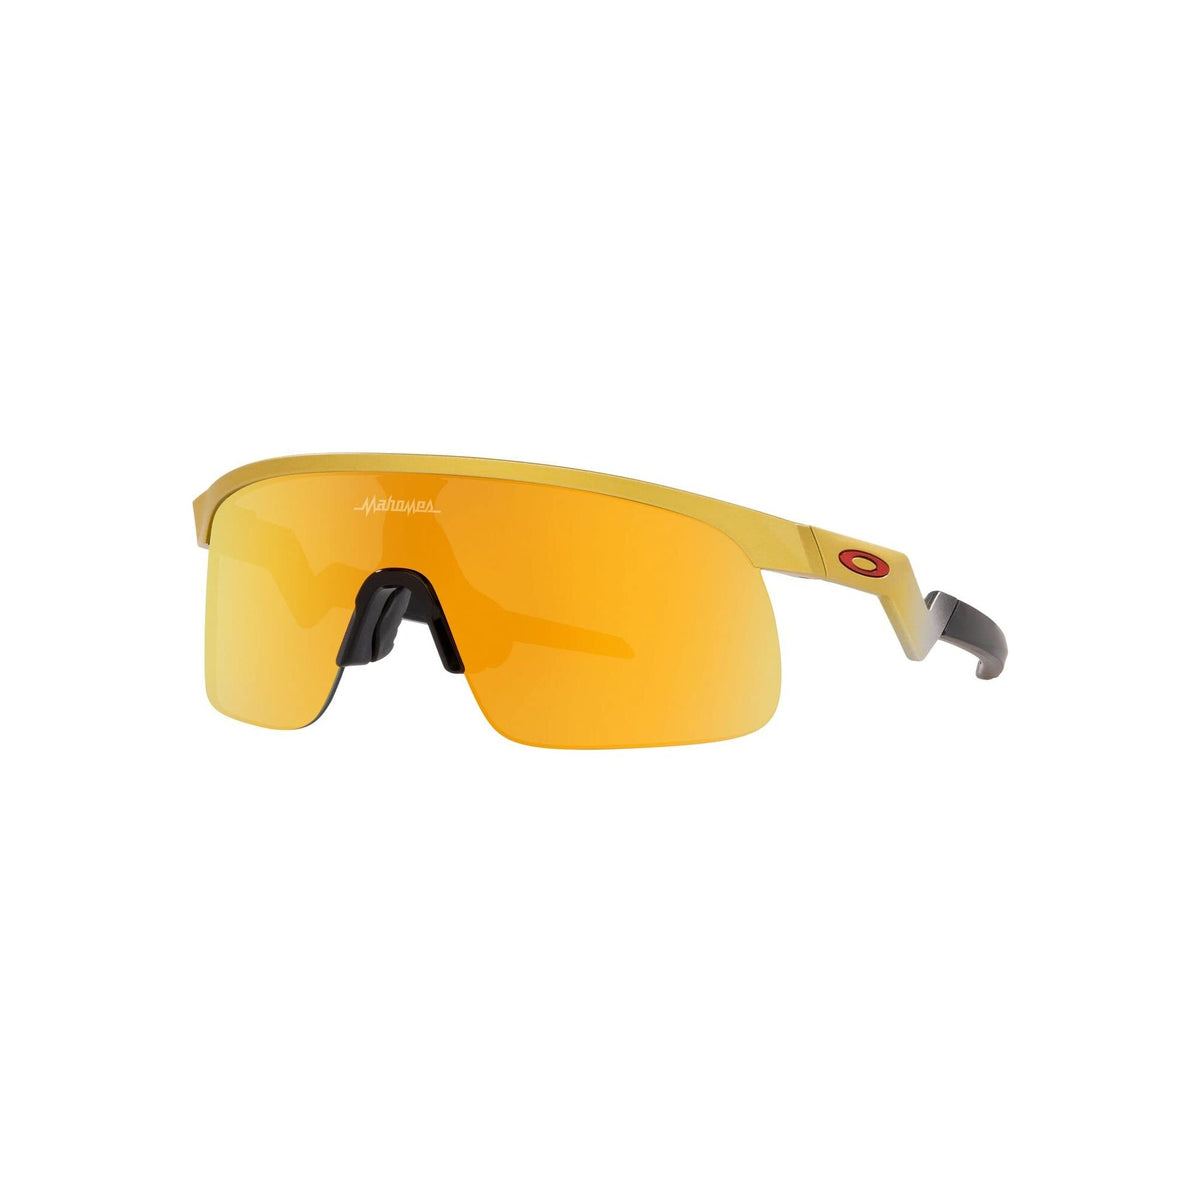 Oakley Resistor (Youth Fit) Sunglasses